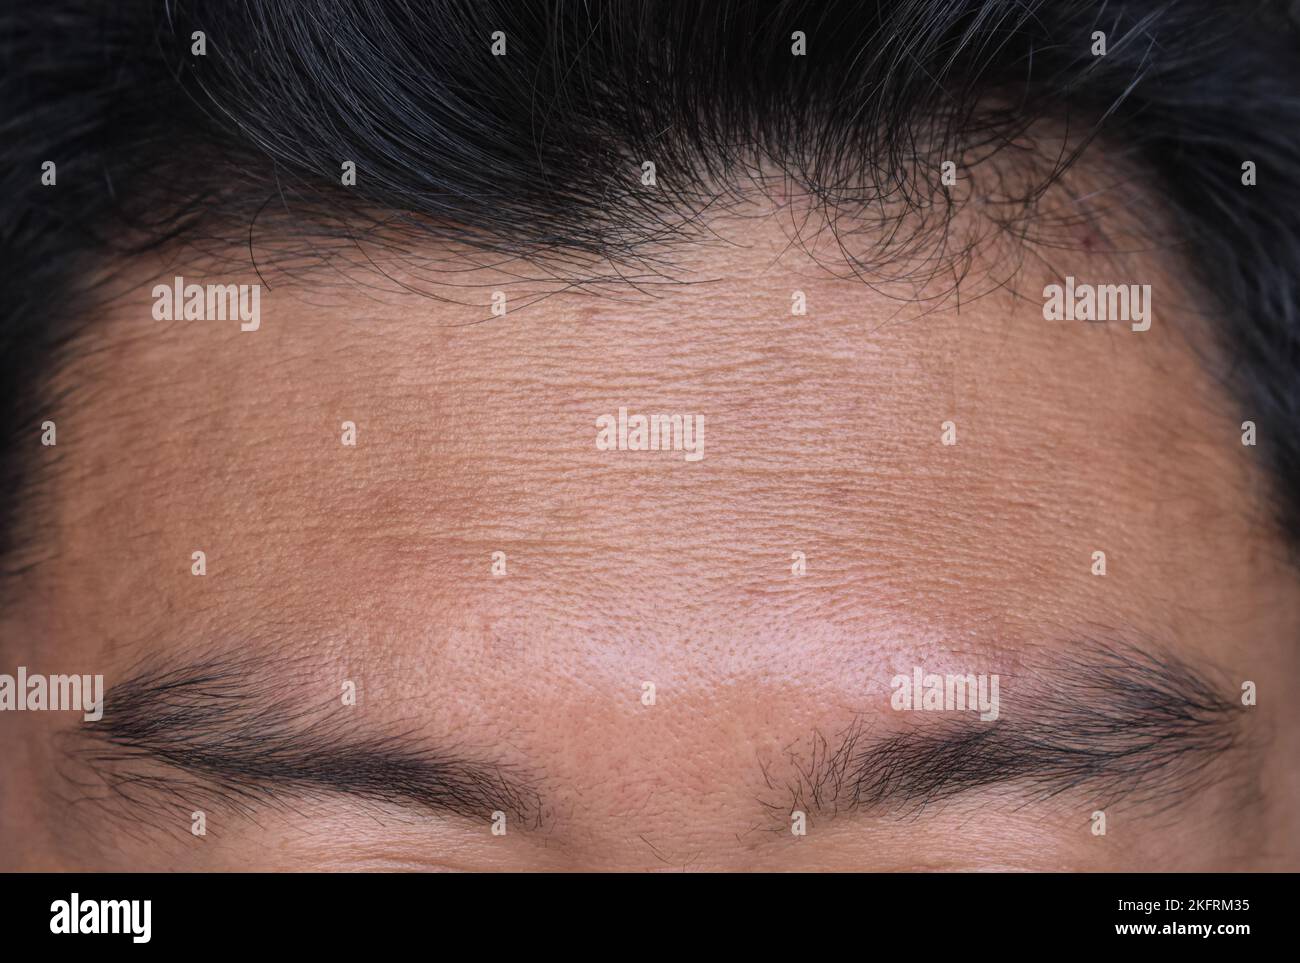 Skin creases or wrinkles at the forehead of Southeast Asian, Myanmar or Burmese man. Symptom of aging. Stock Photo